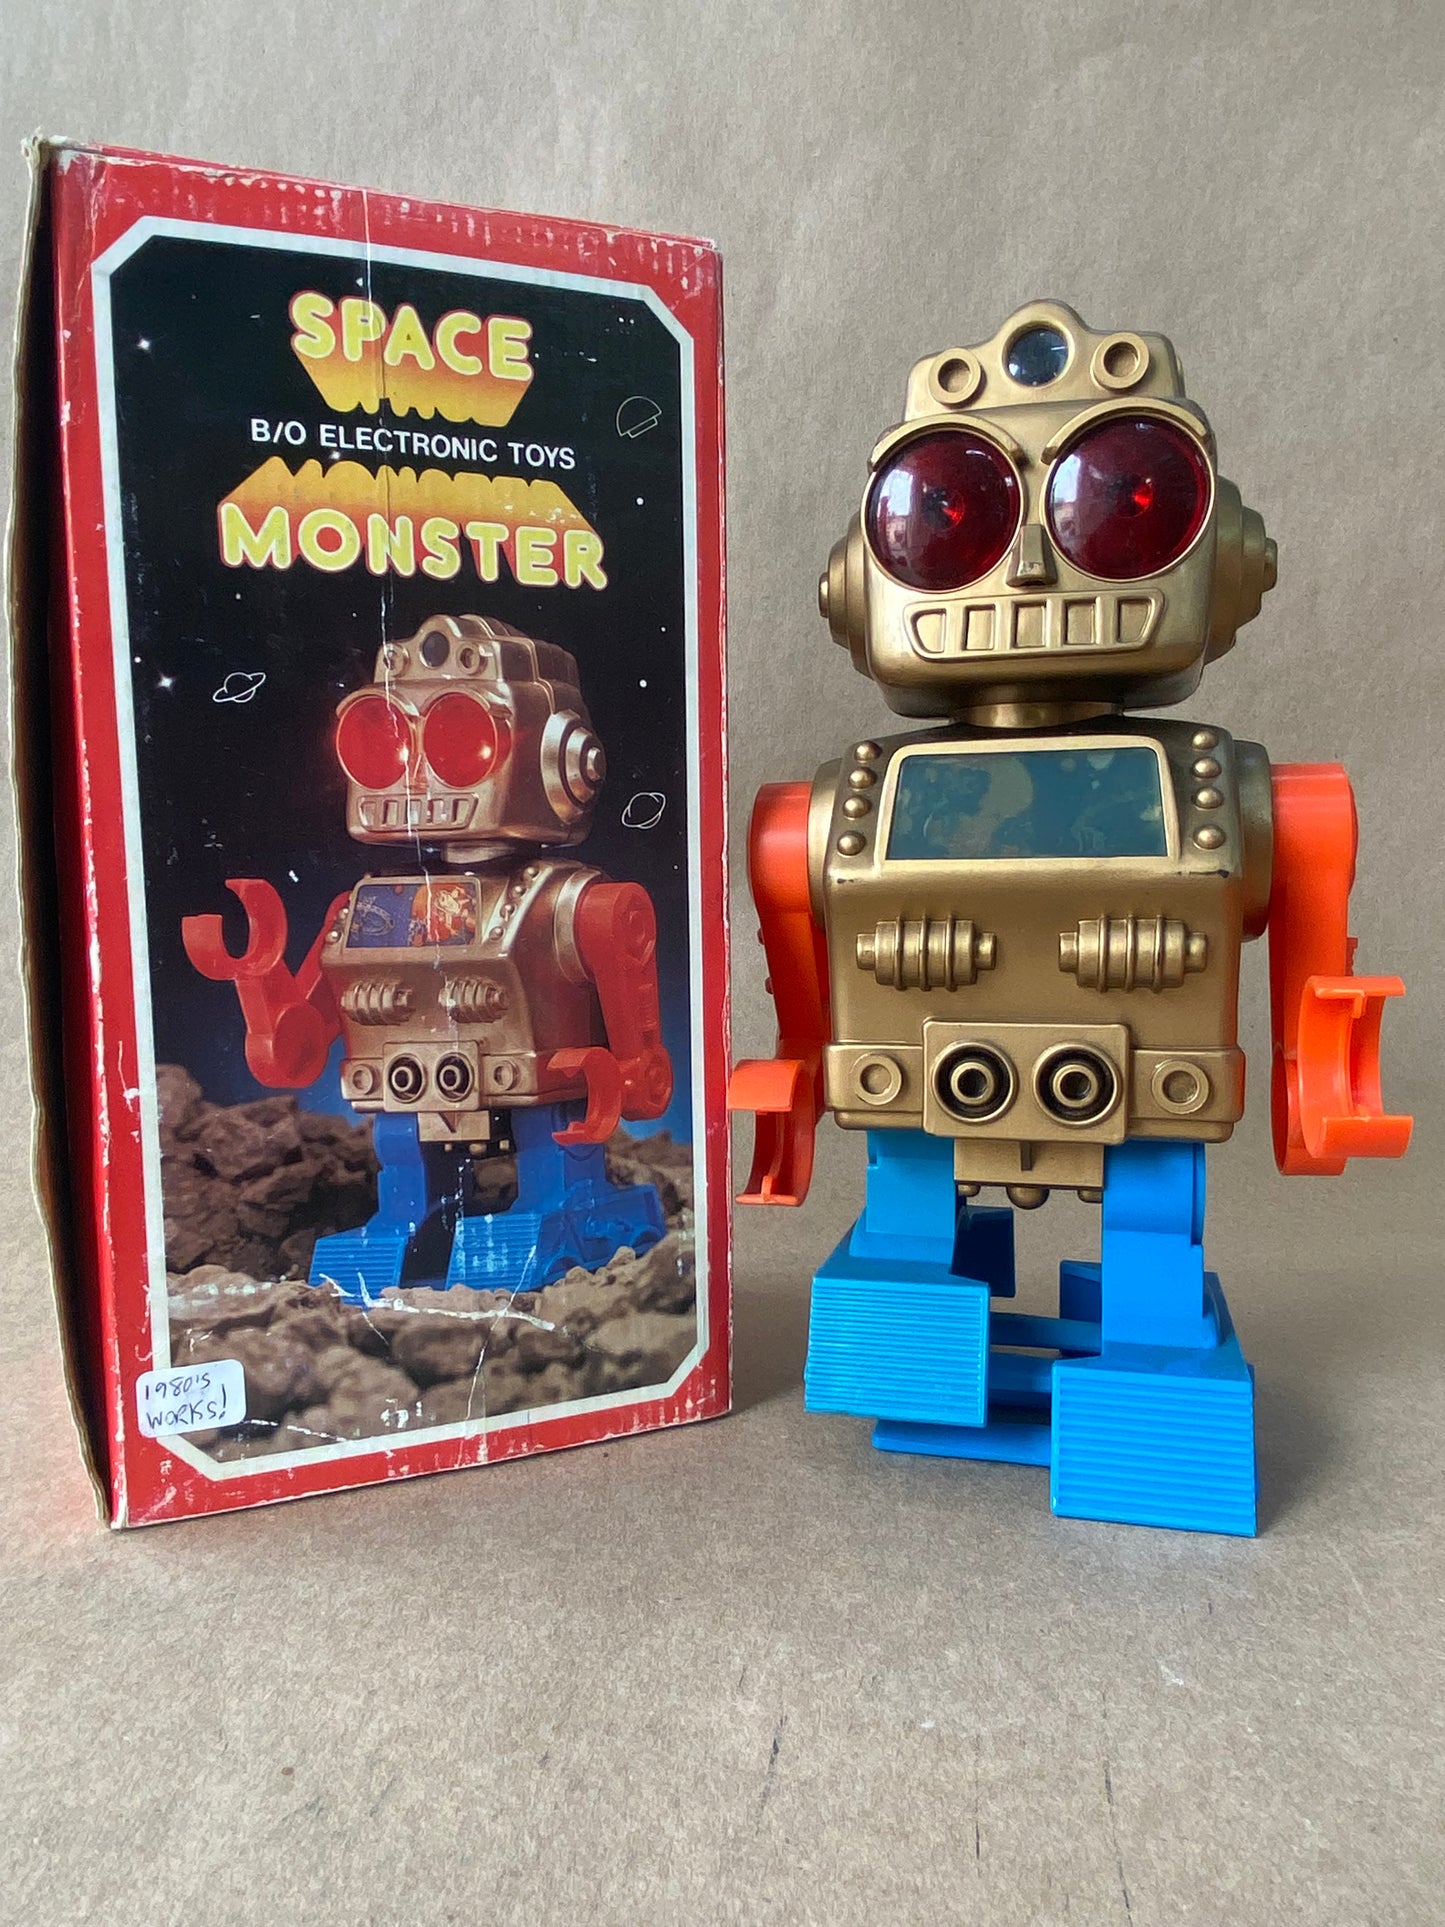 1980's Space Monster Robot toy